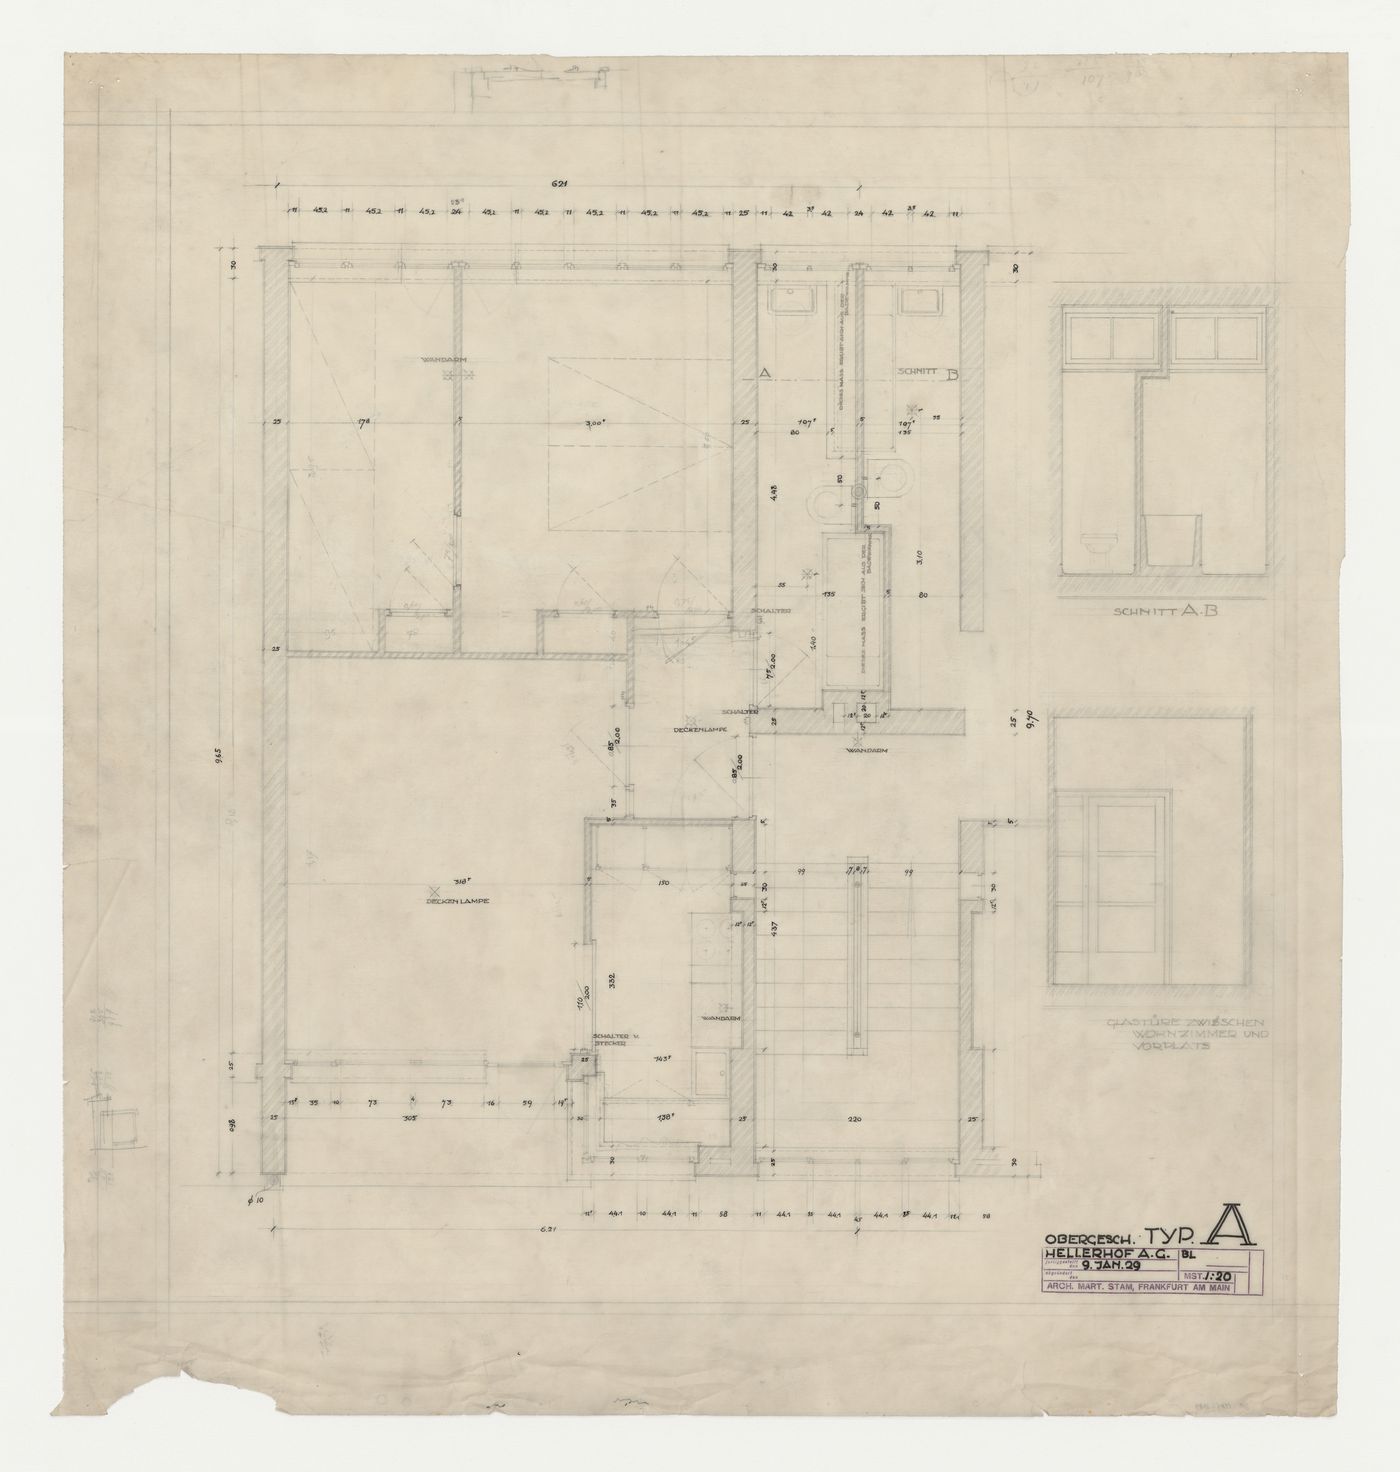 First floor plan and sections for a type A housing unit, Hellerhof Housing Estate, Frankfurt am Main, Germany